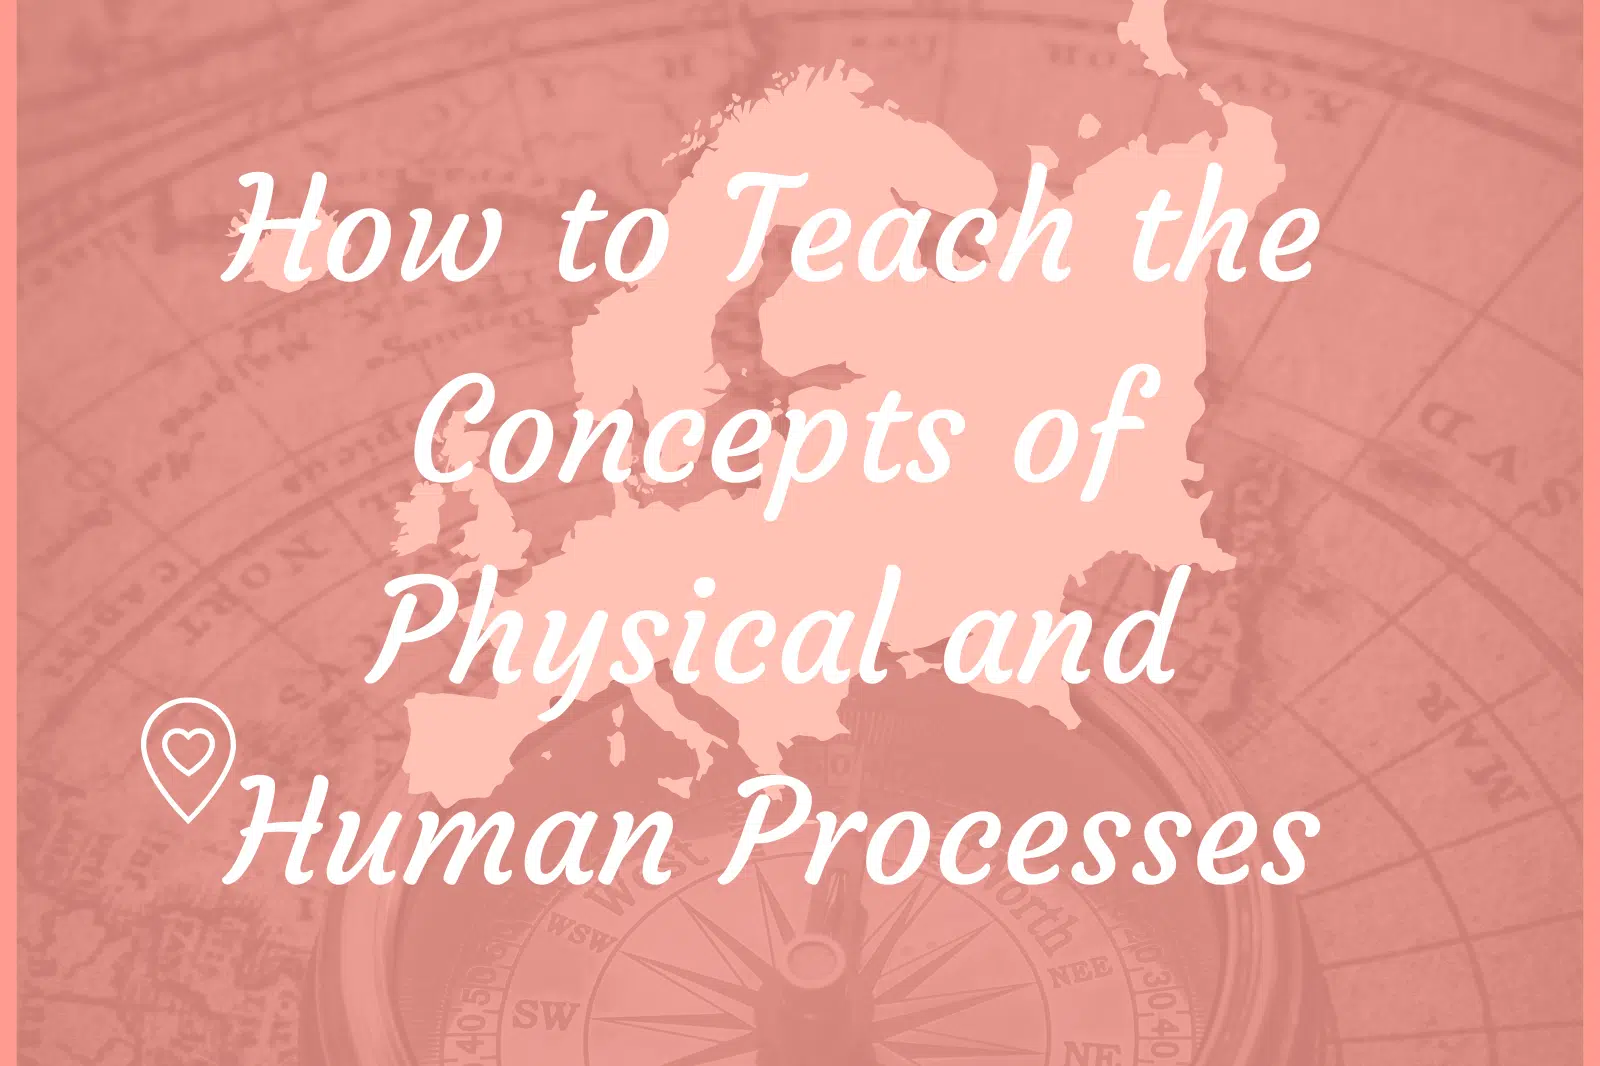 How to Teach the Concepts of Physical and Human Processes